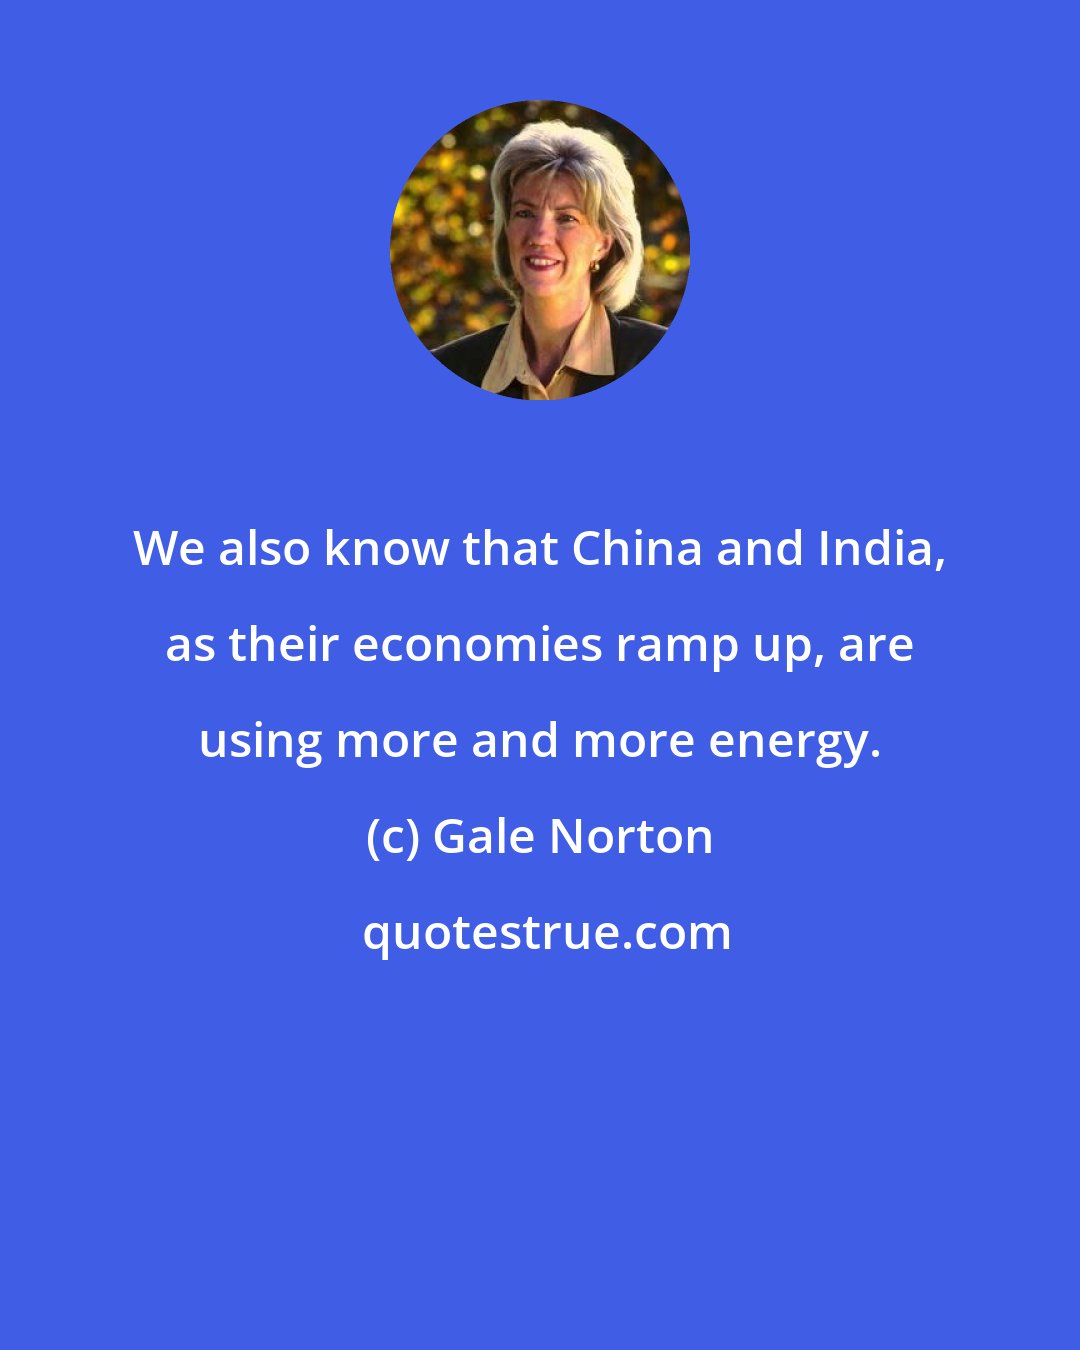 Gale Norton: We also know that China and India, as their economies ramp up, are using more and more energy.